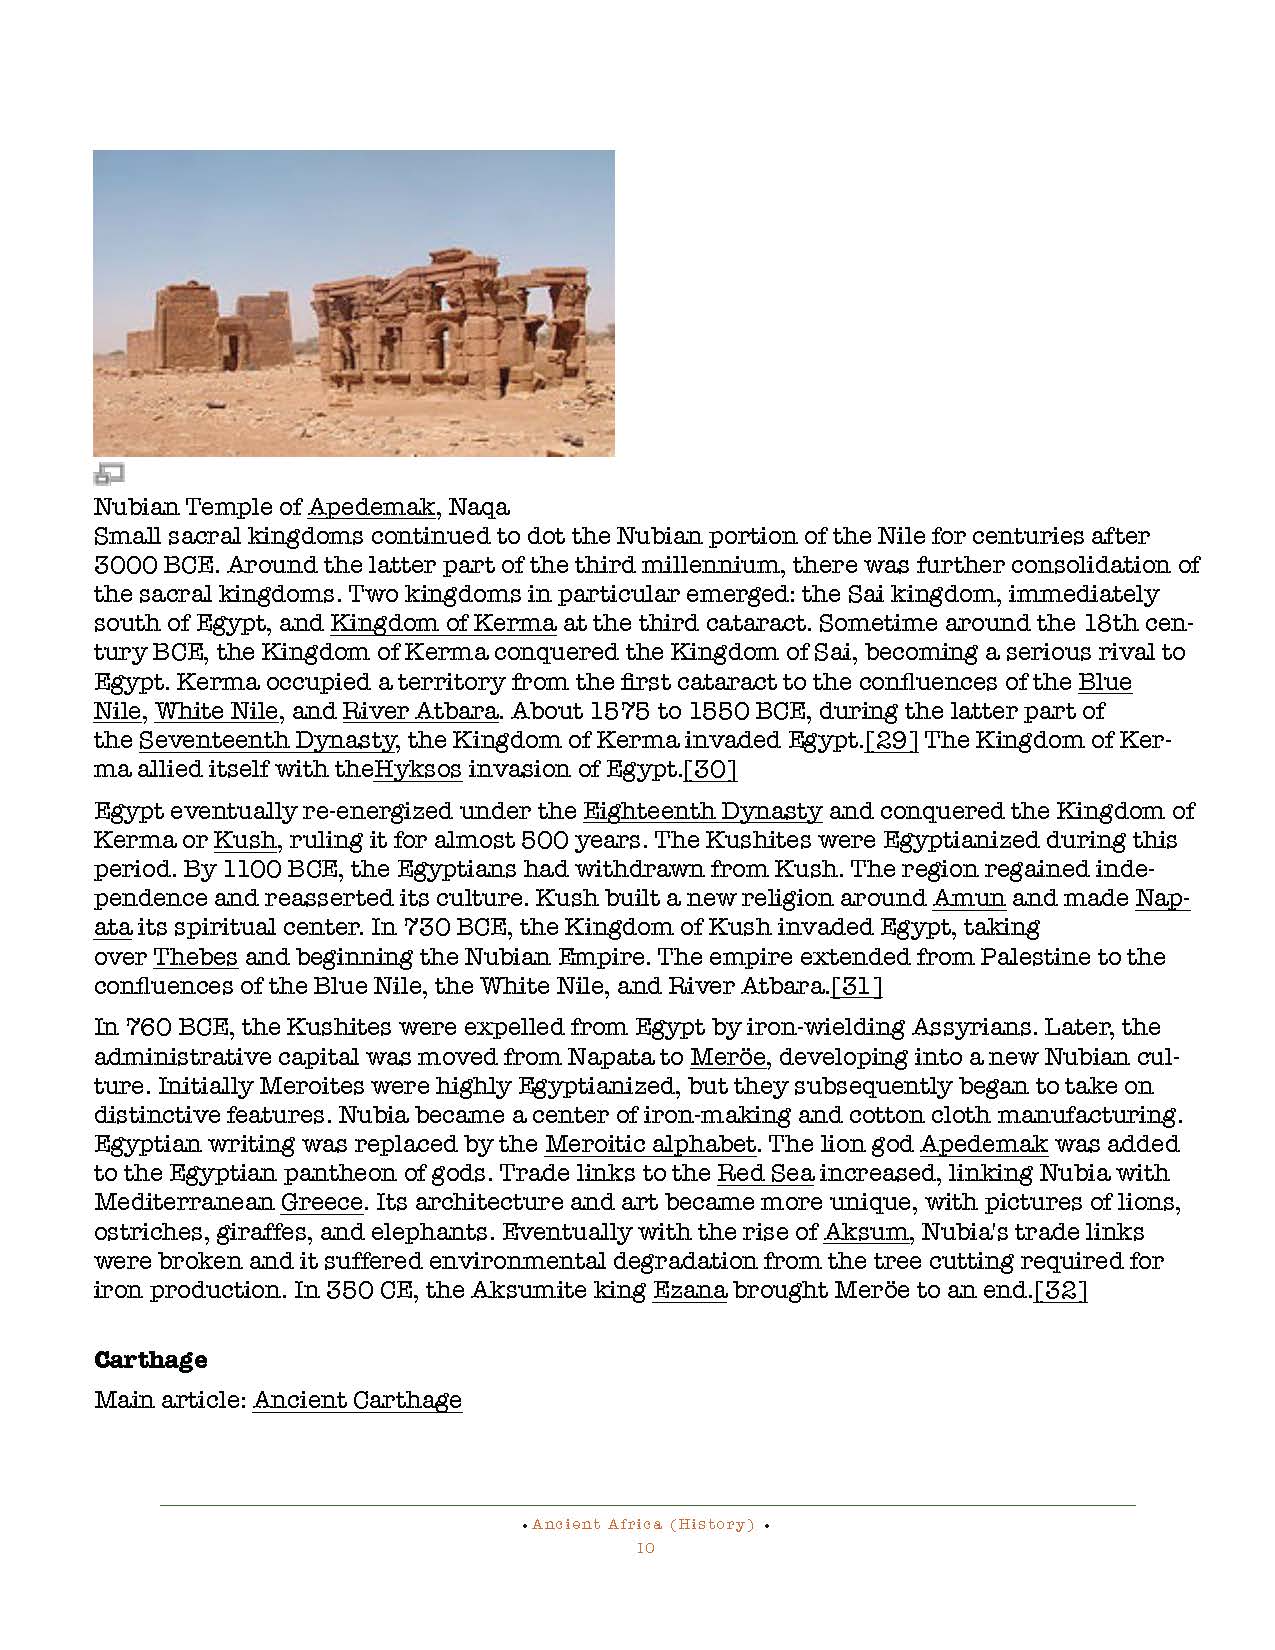 HOCE- Ancient Africa Notes_Page_010.jpg